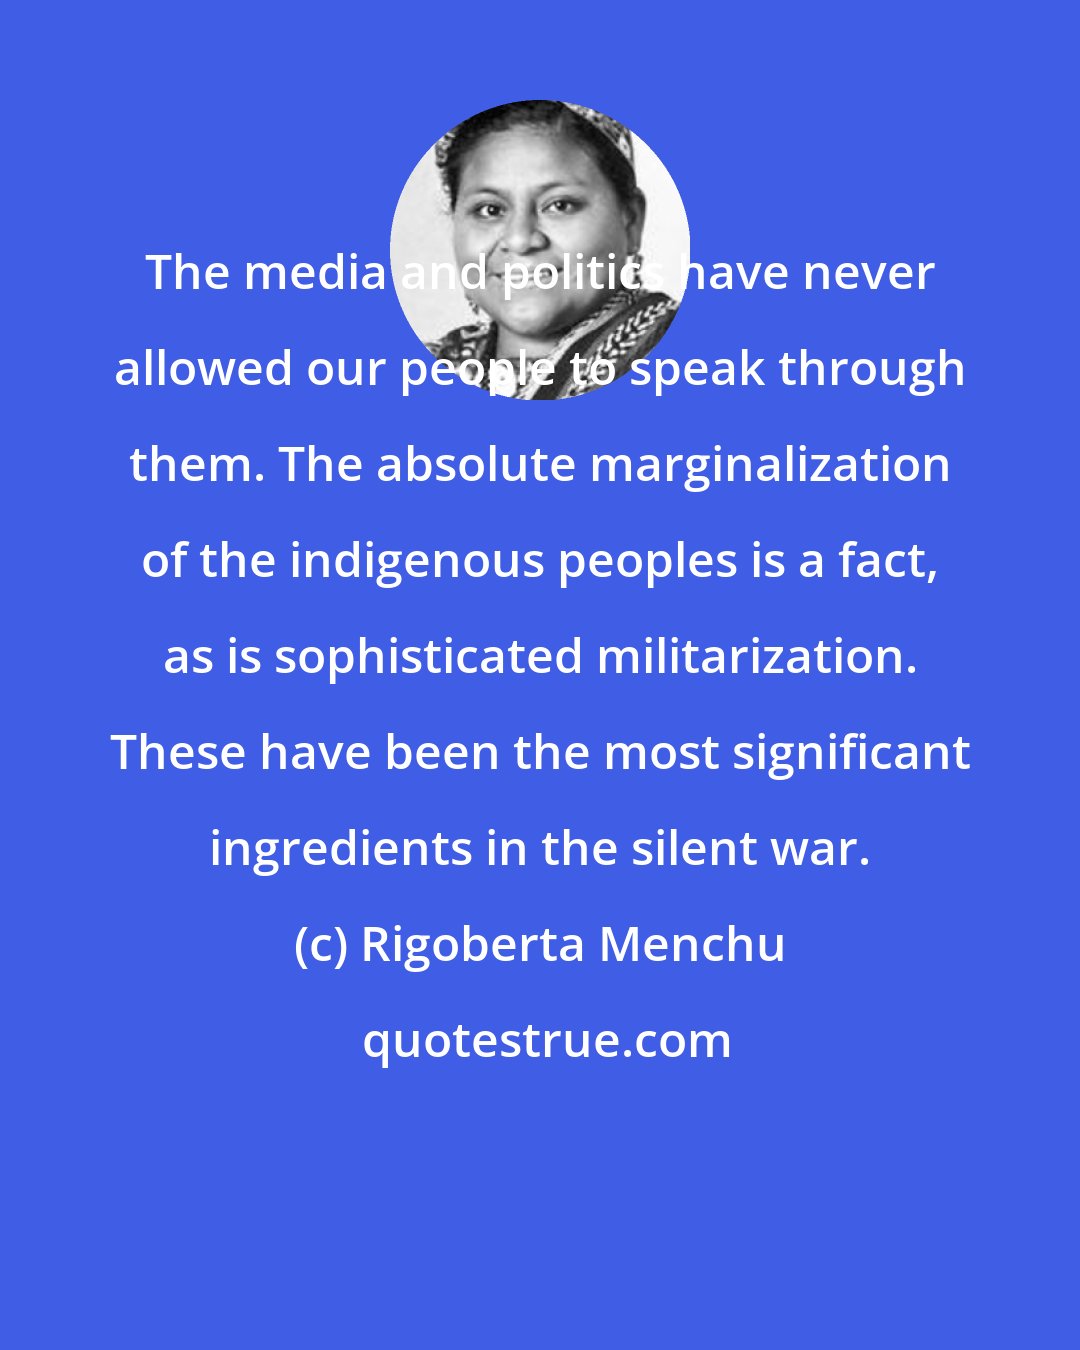 Rigoberta Menchu: The media and politics have never allowed our people to speak through them. The absolute marginalization of the indigenous peoples is a fact, as is sophisticated militarization. These have been the most significant ingredients in the silent war.